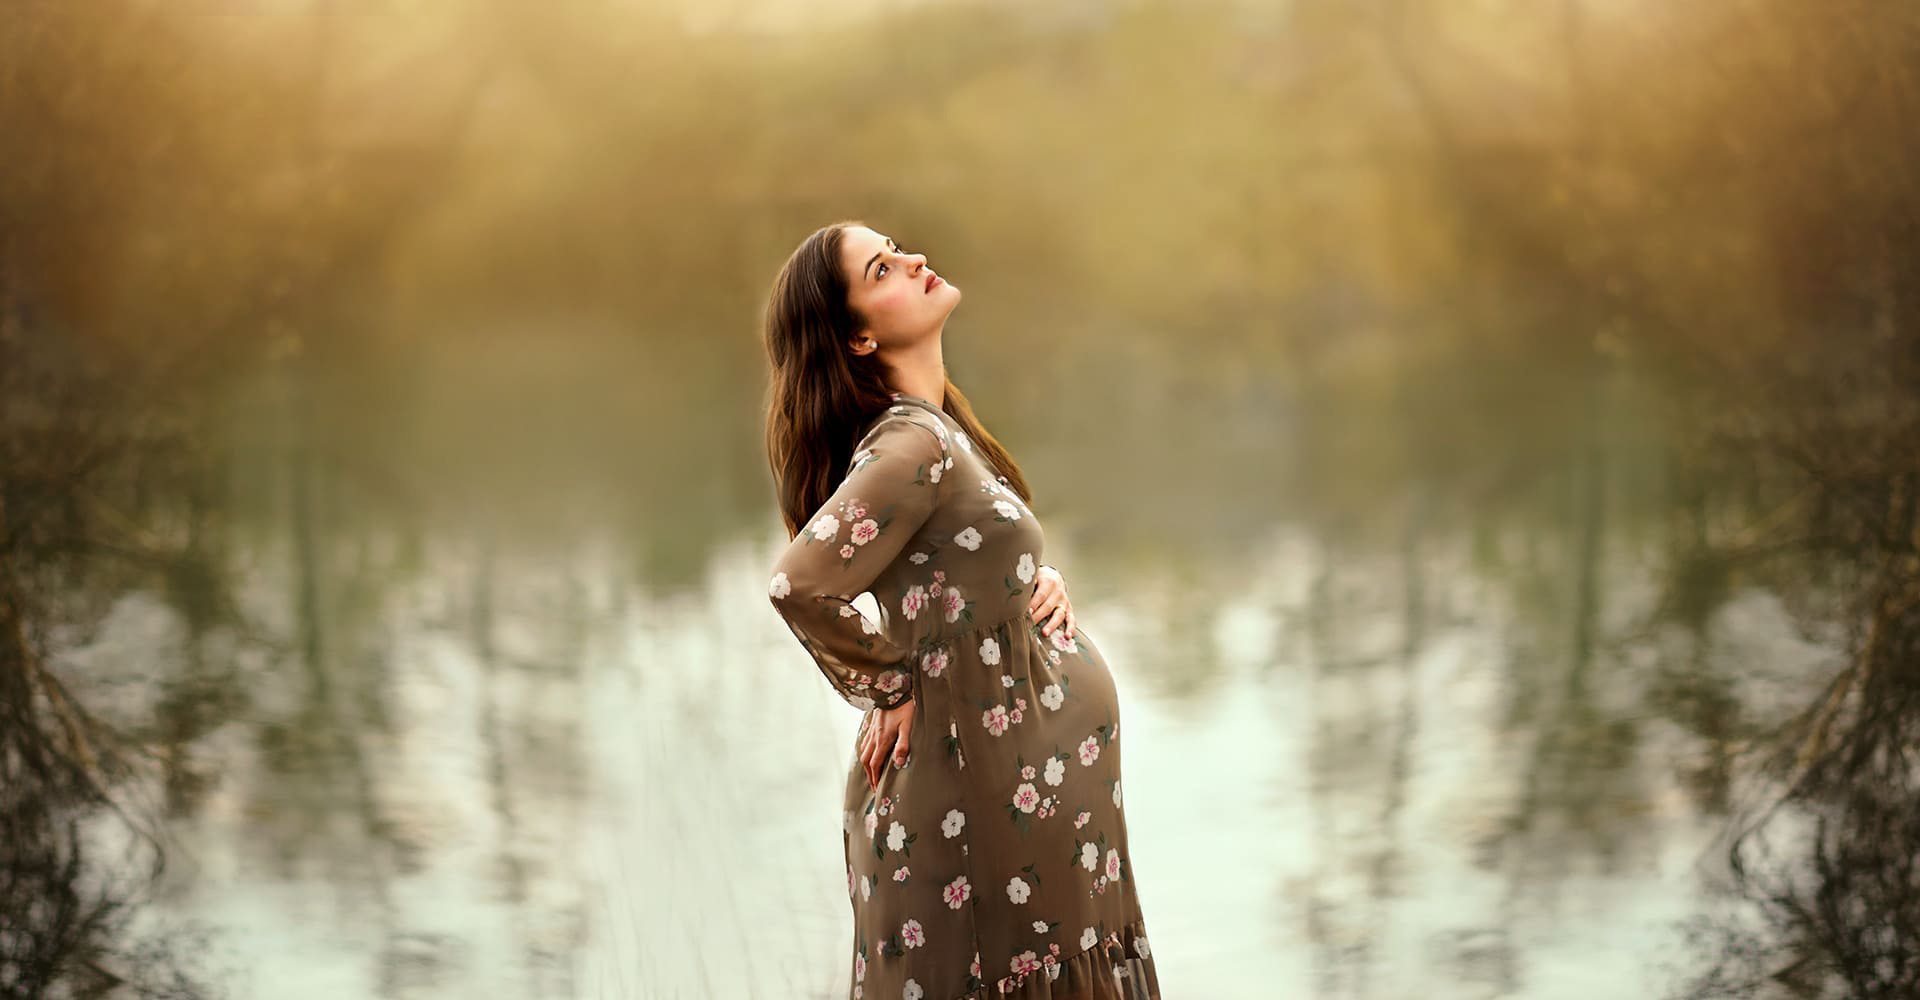 Pregnancy shooting area Luzern, outdoor photos with natural light at the see.